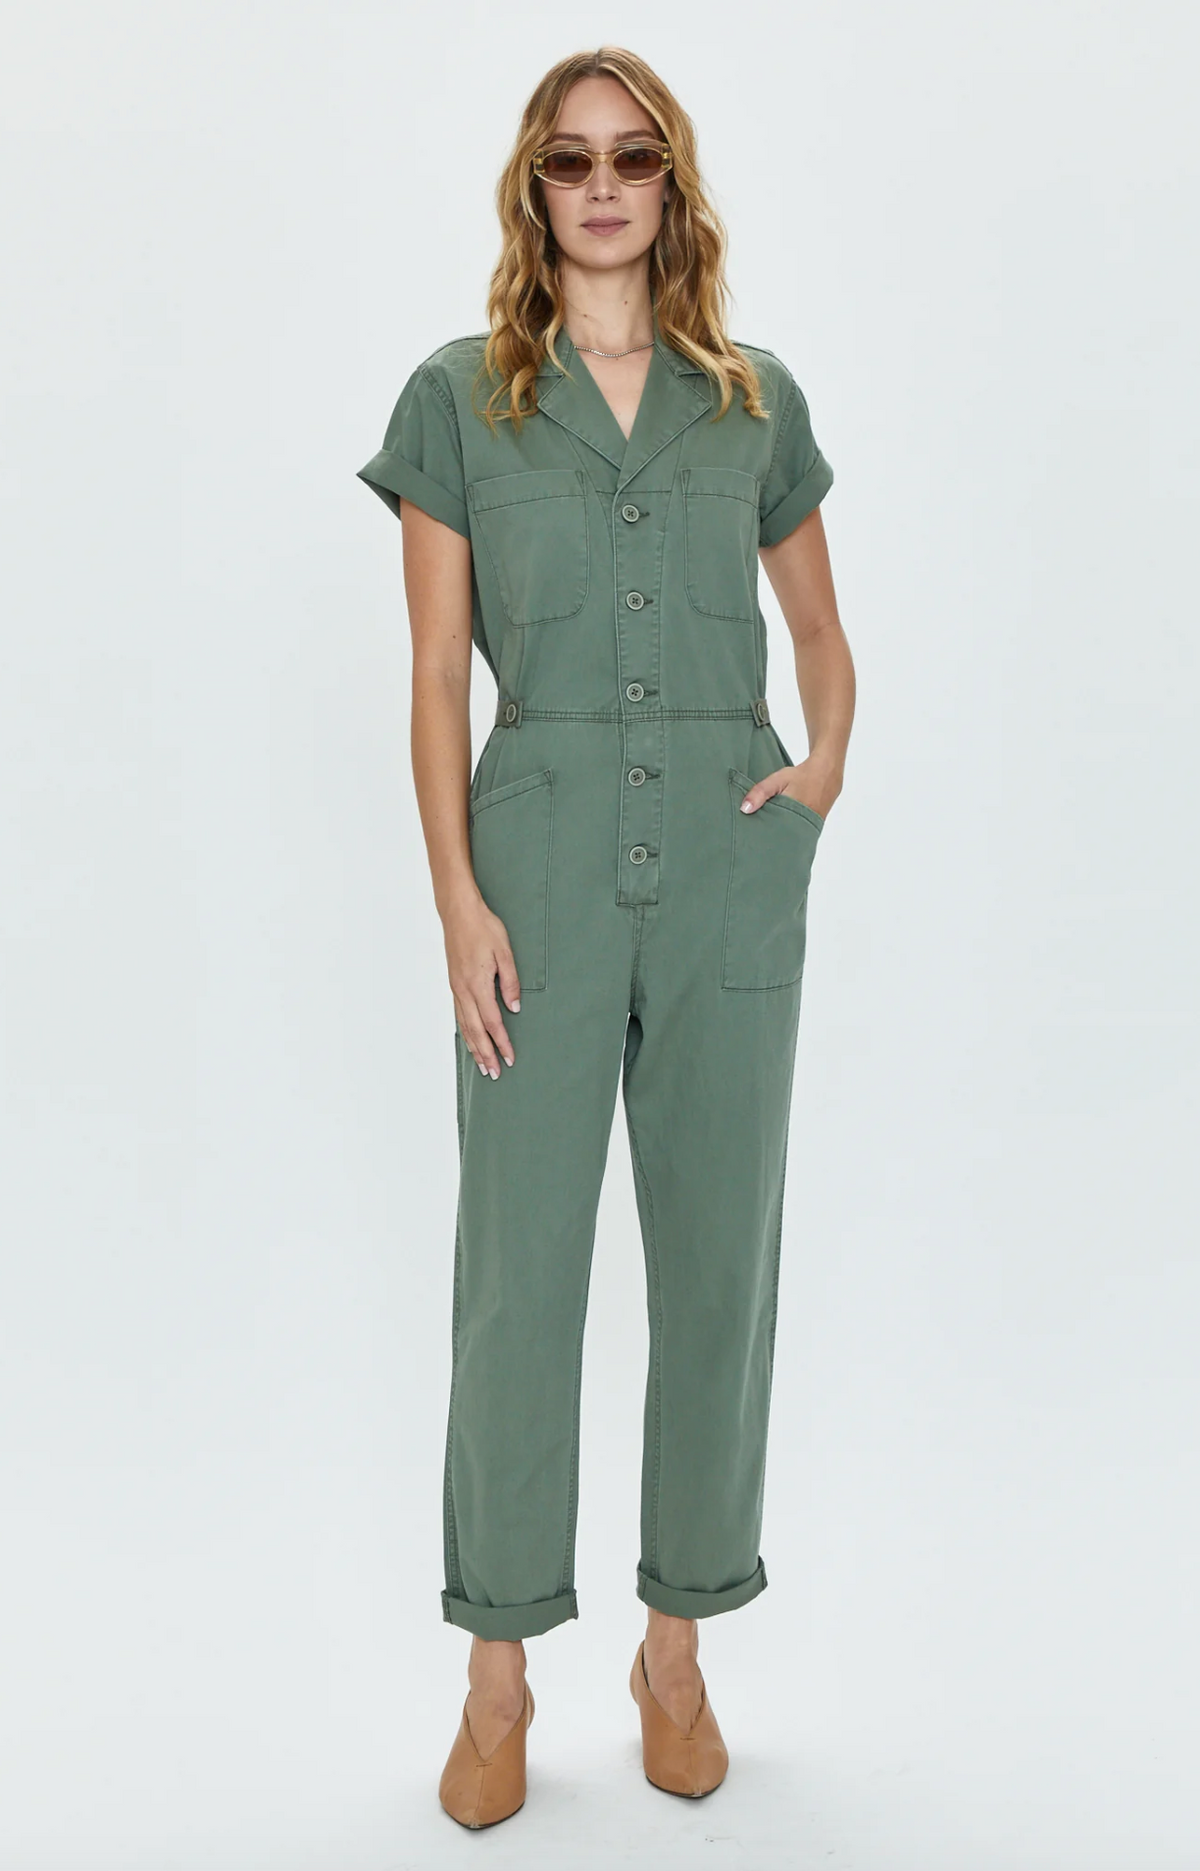 Grover Short Sleeve Field Suit Colonel